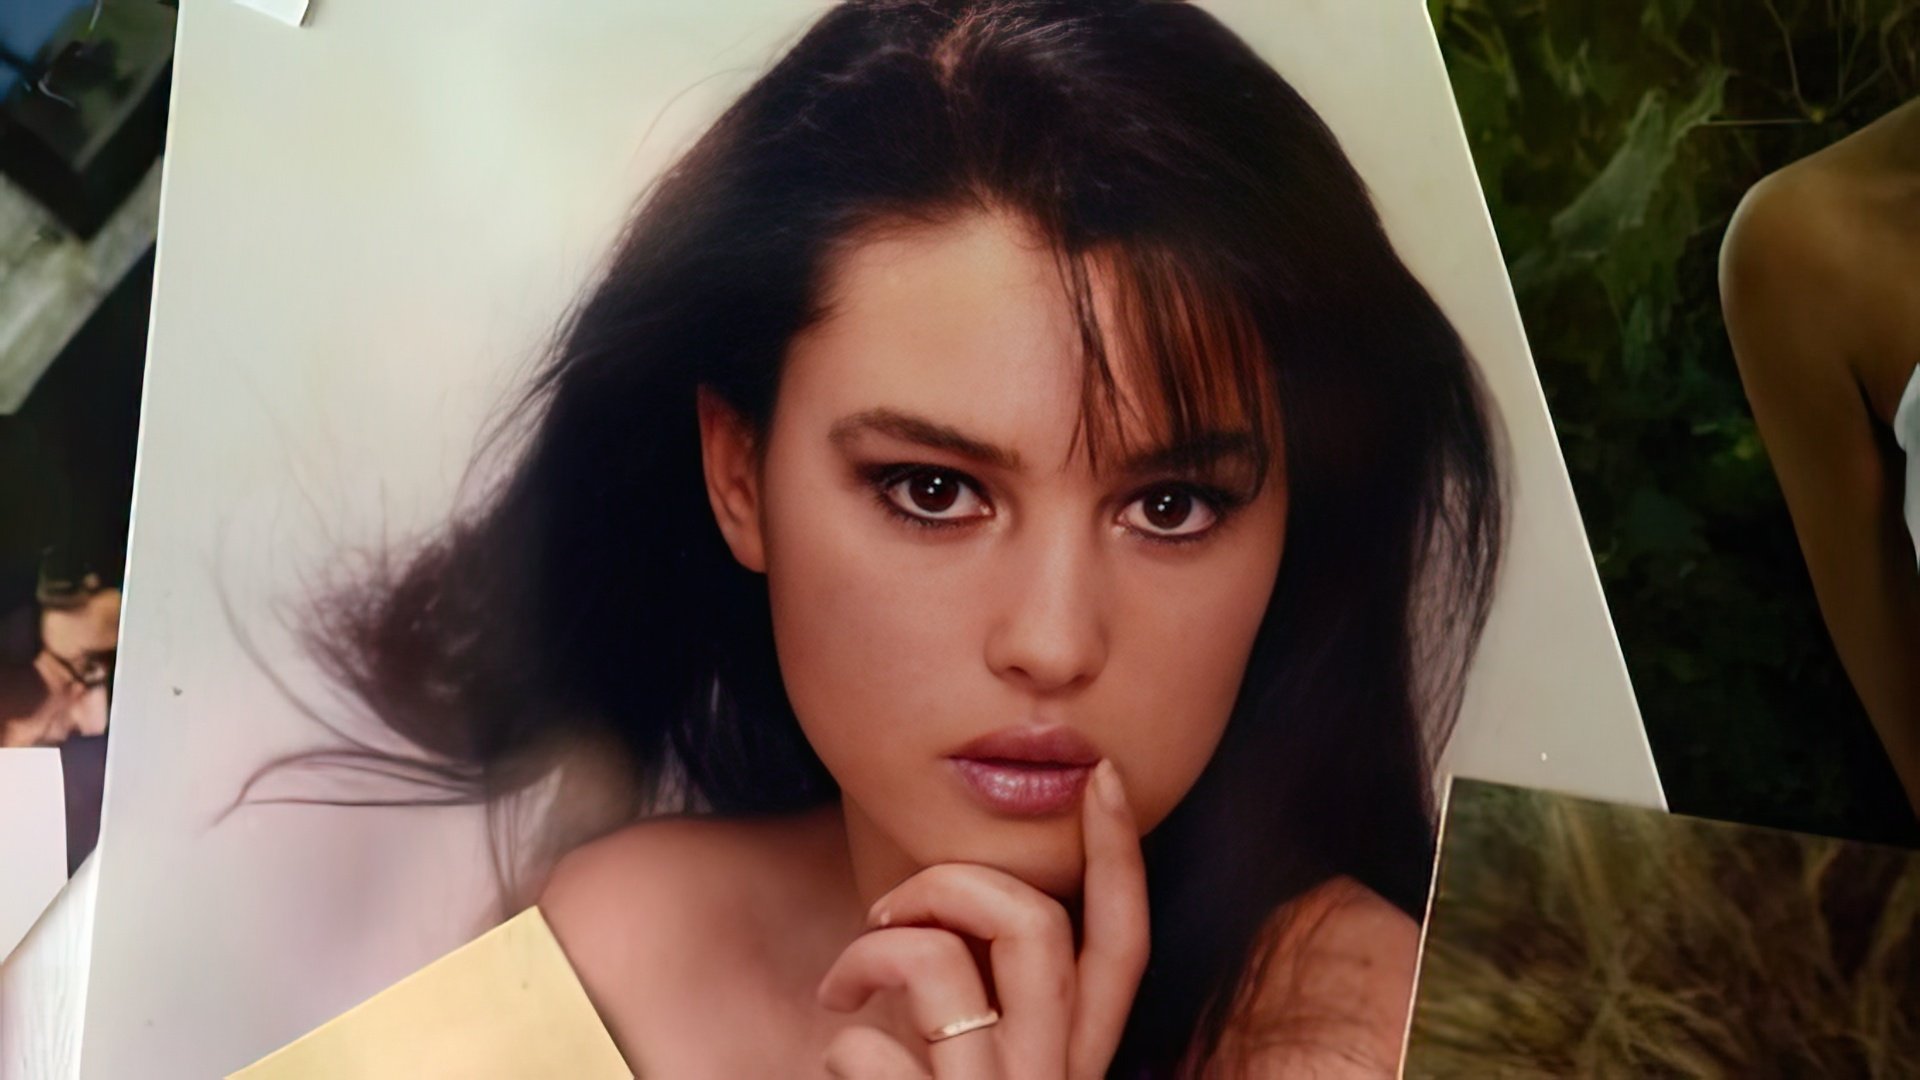 At 16, Bellucci signed a contract with a renowned modeling agency